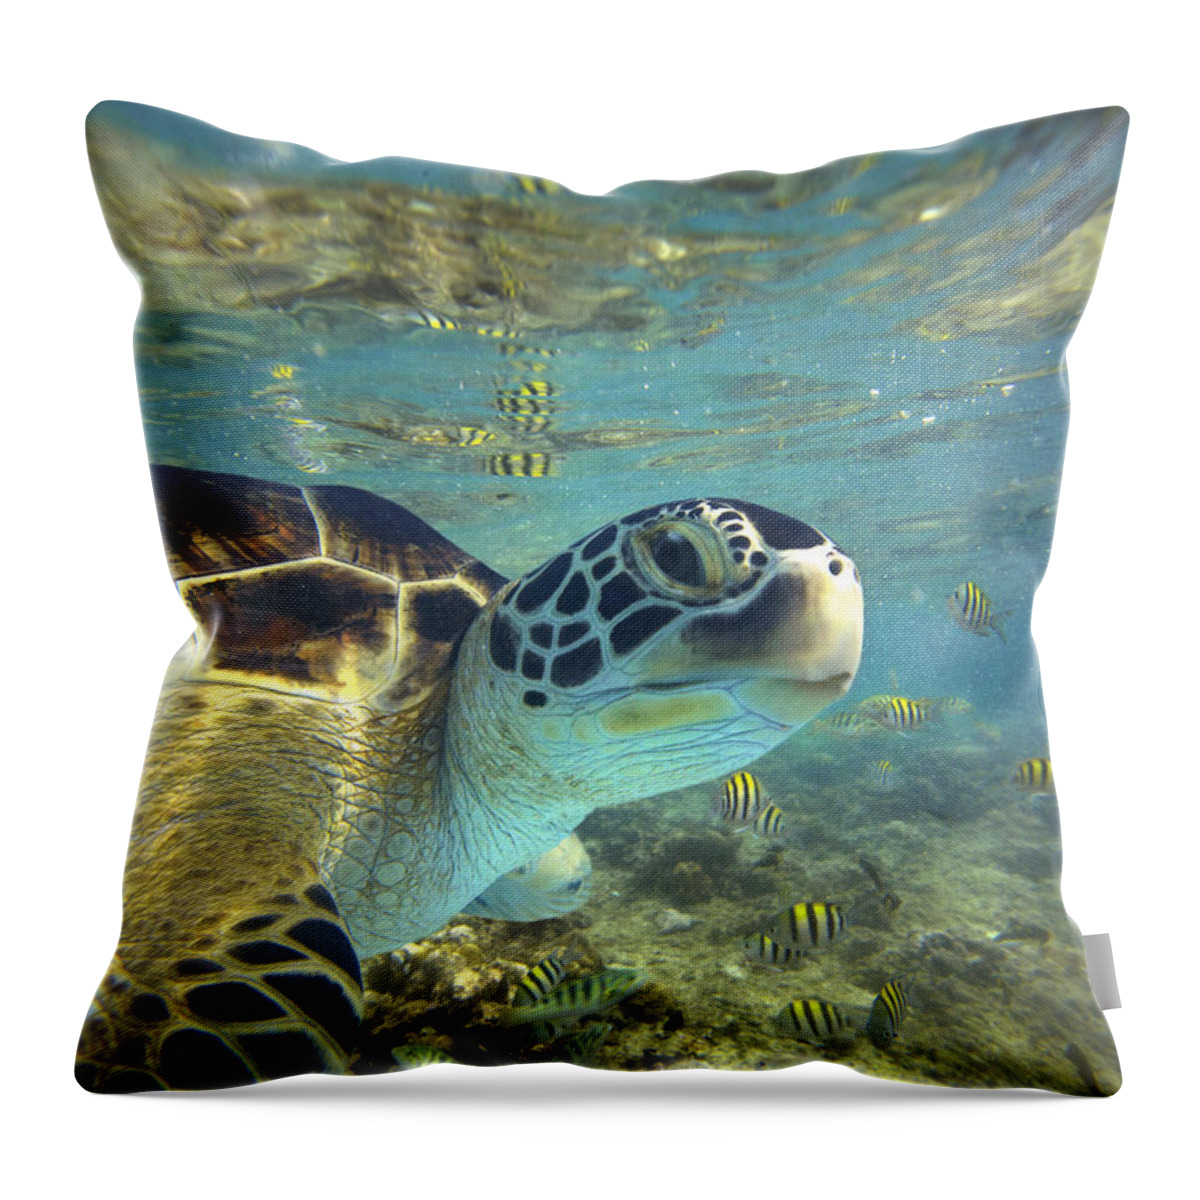 00451417 Throw Pillow featuring the photograph Green Sea Turtle Balicasag Island by Tim Fitzharris